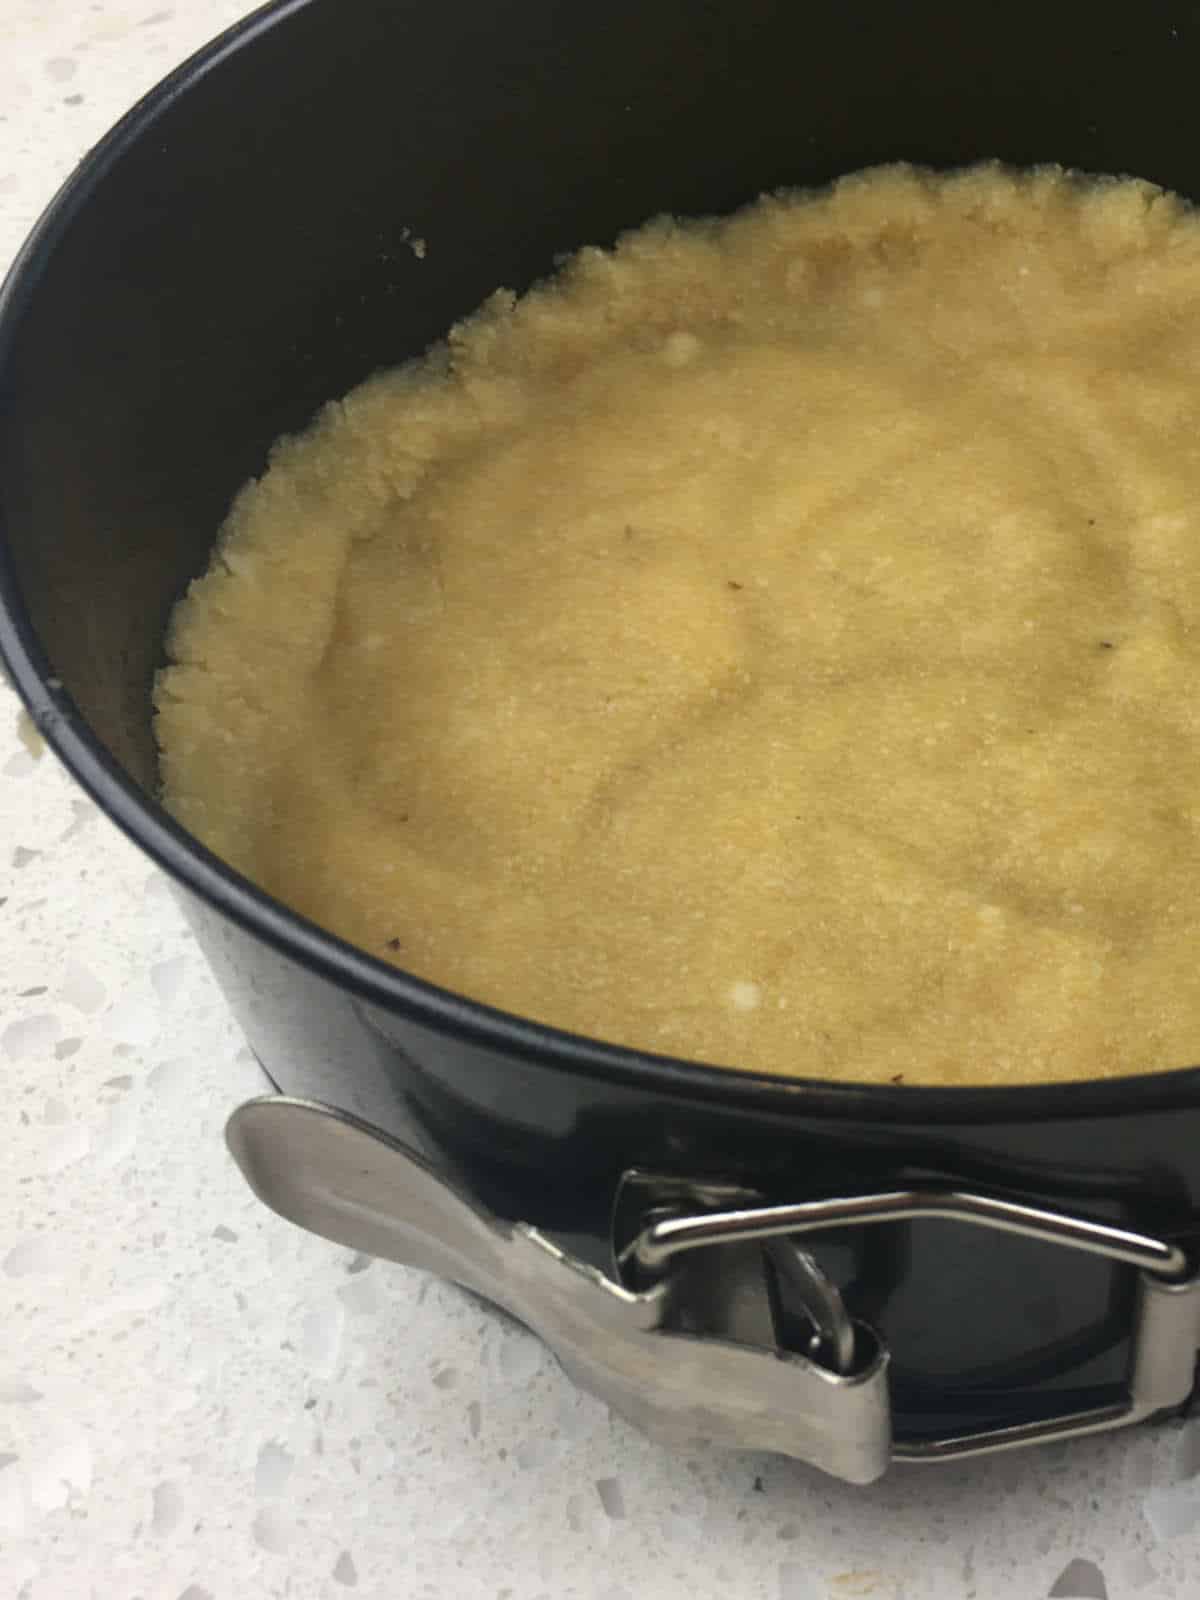 shaping keto cheesecake crust in a Springform pan.